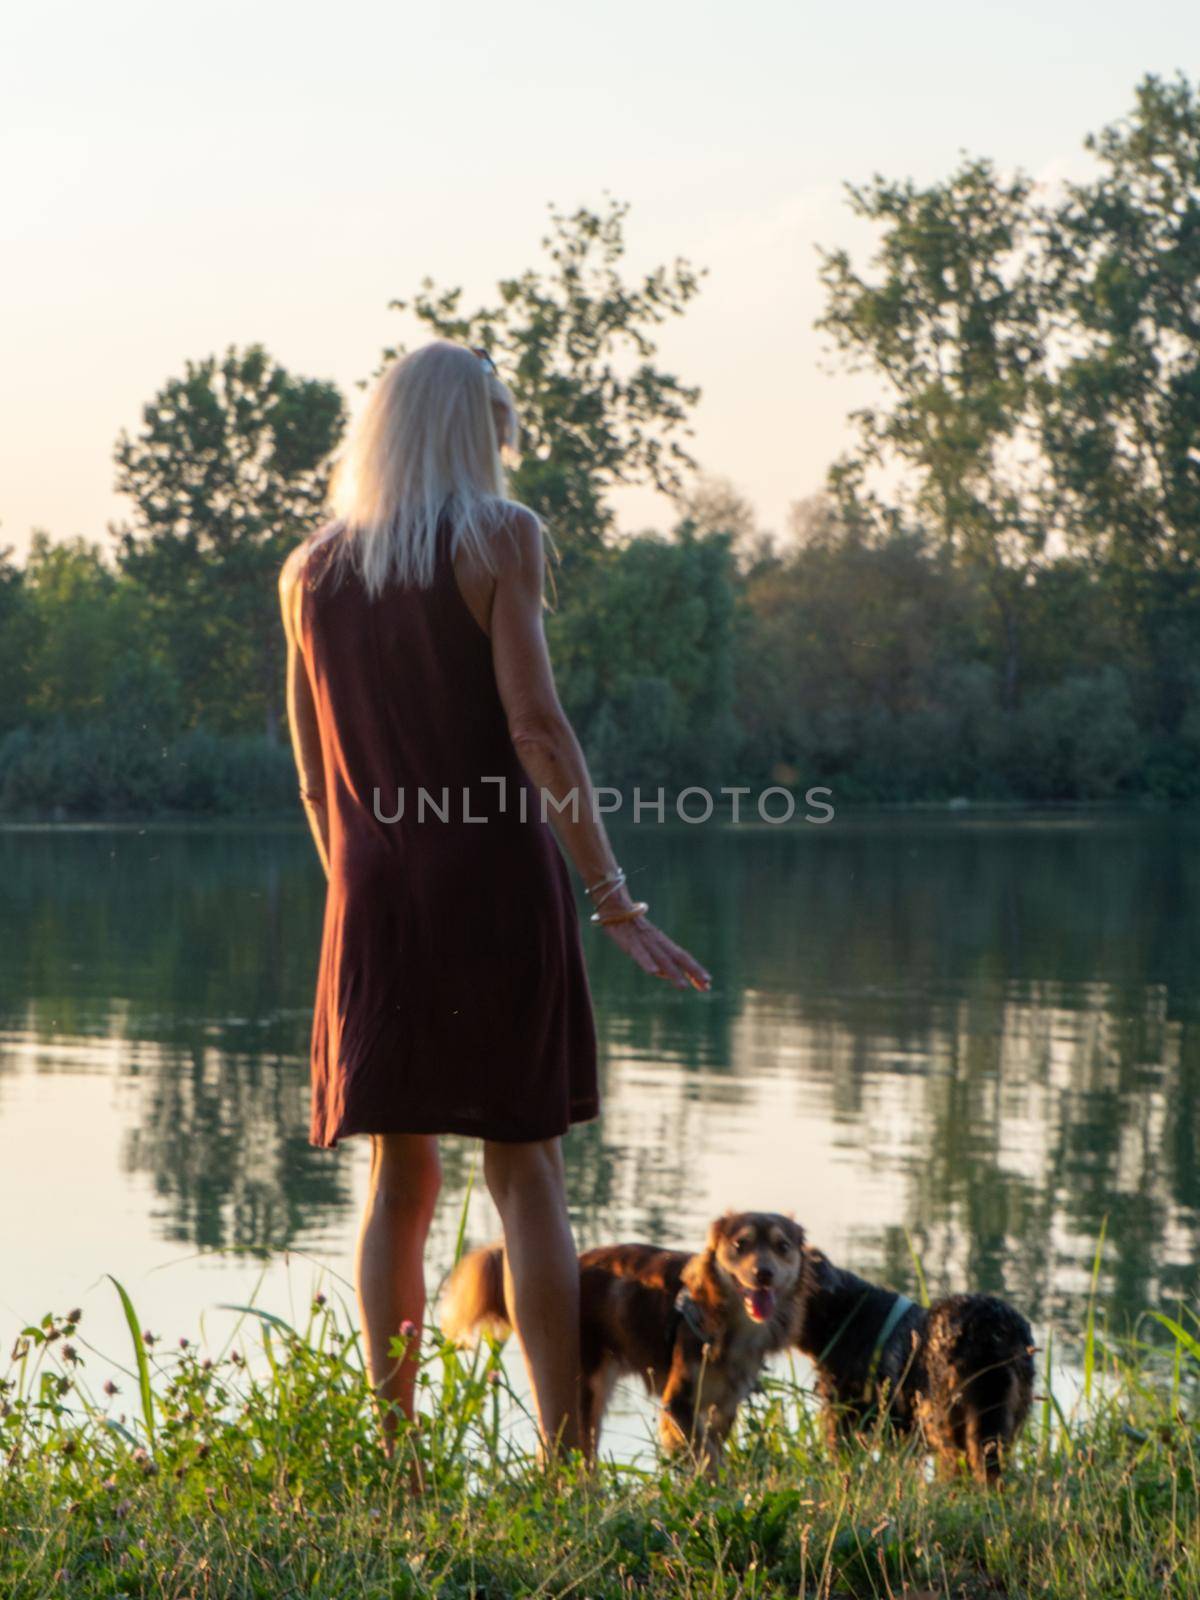 Beautiful woman enjoys holidays at sunset near river with pets company